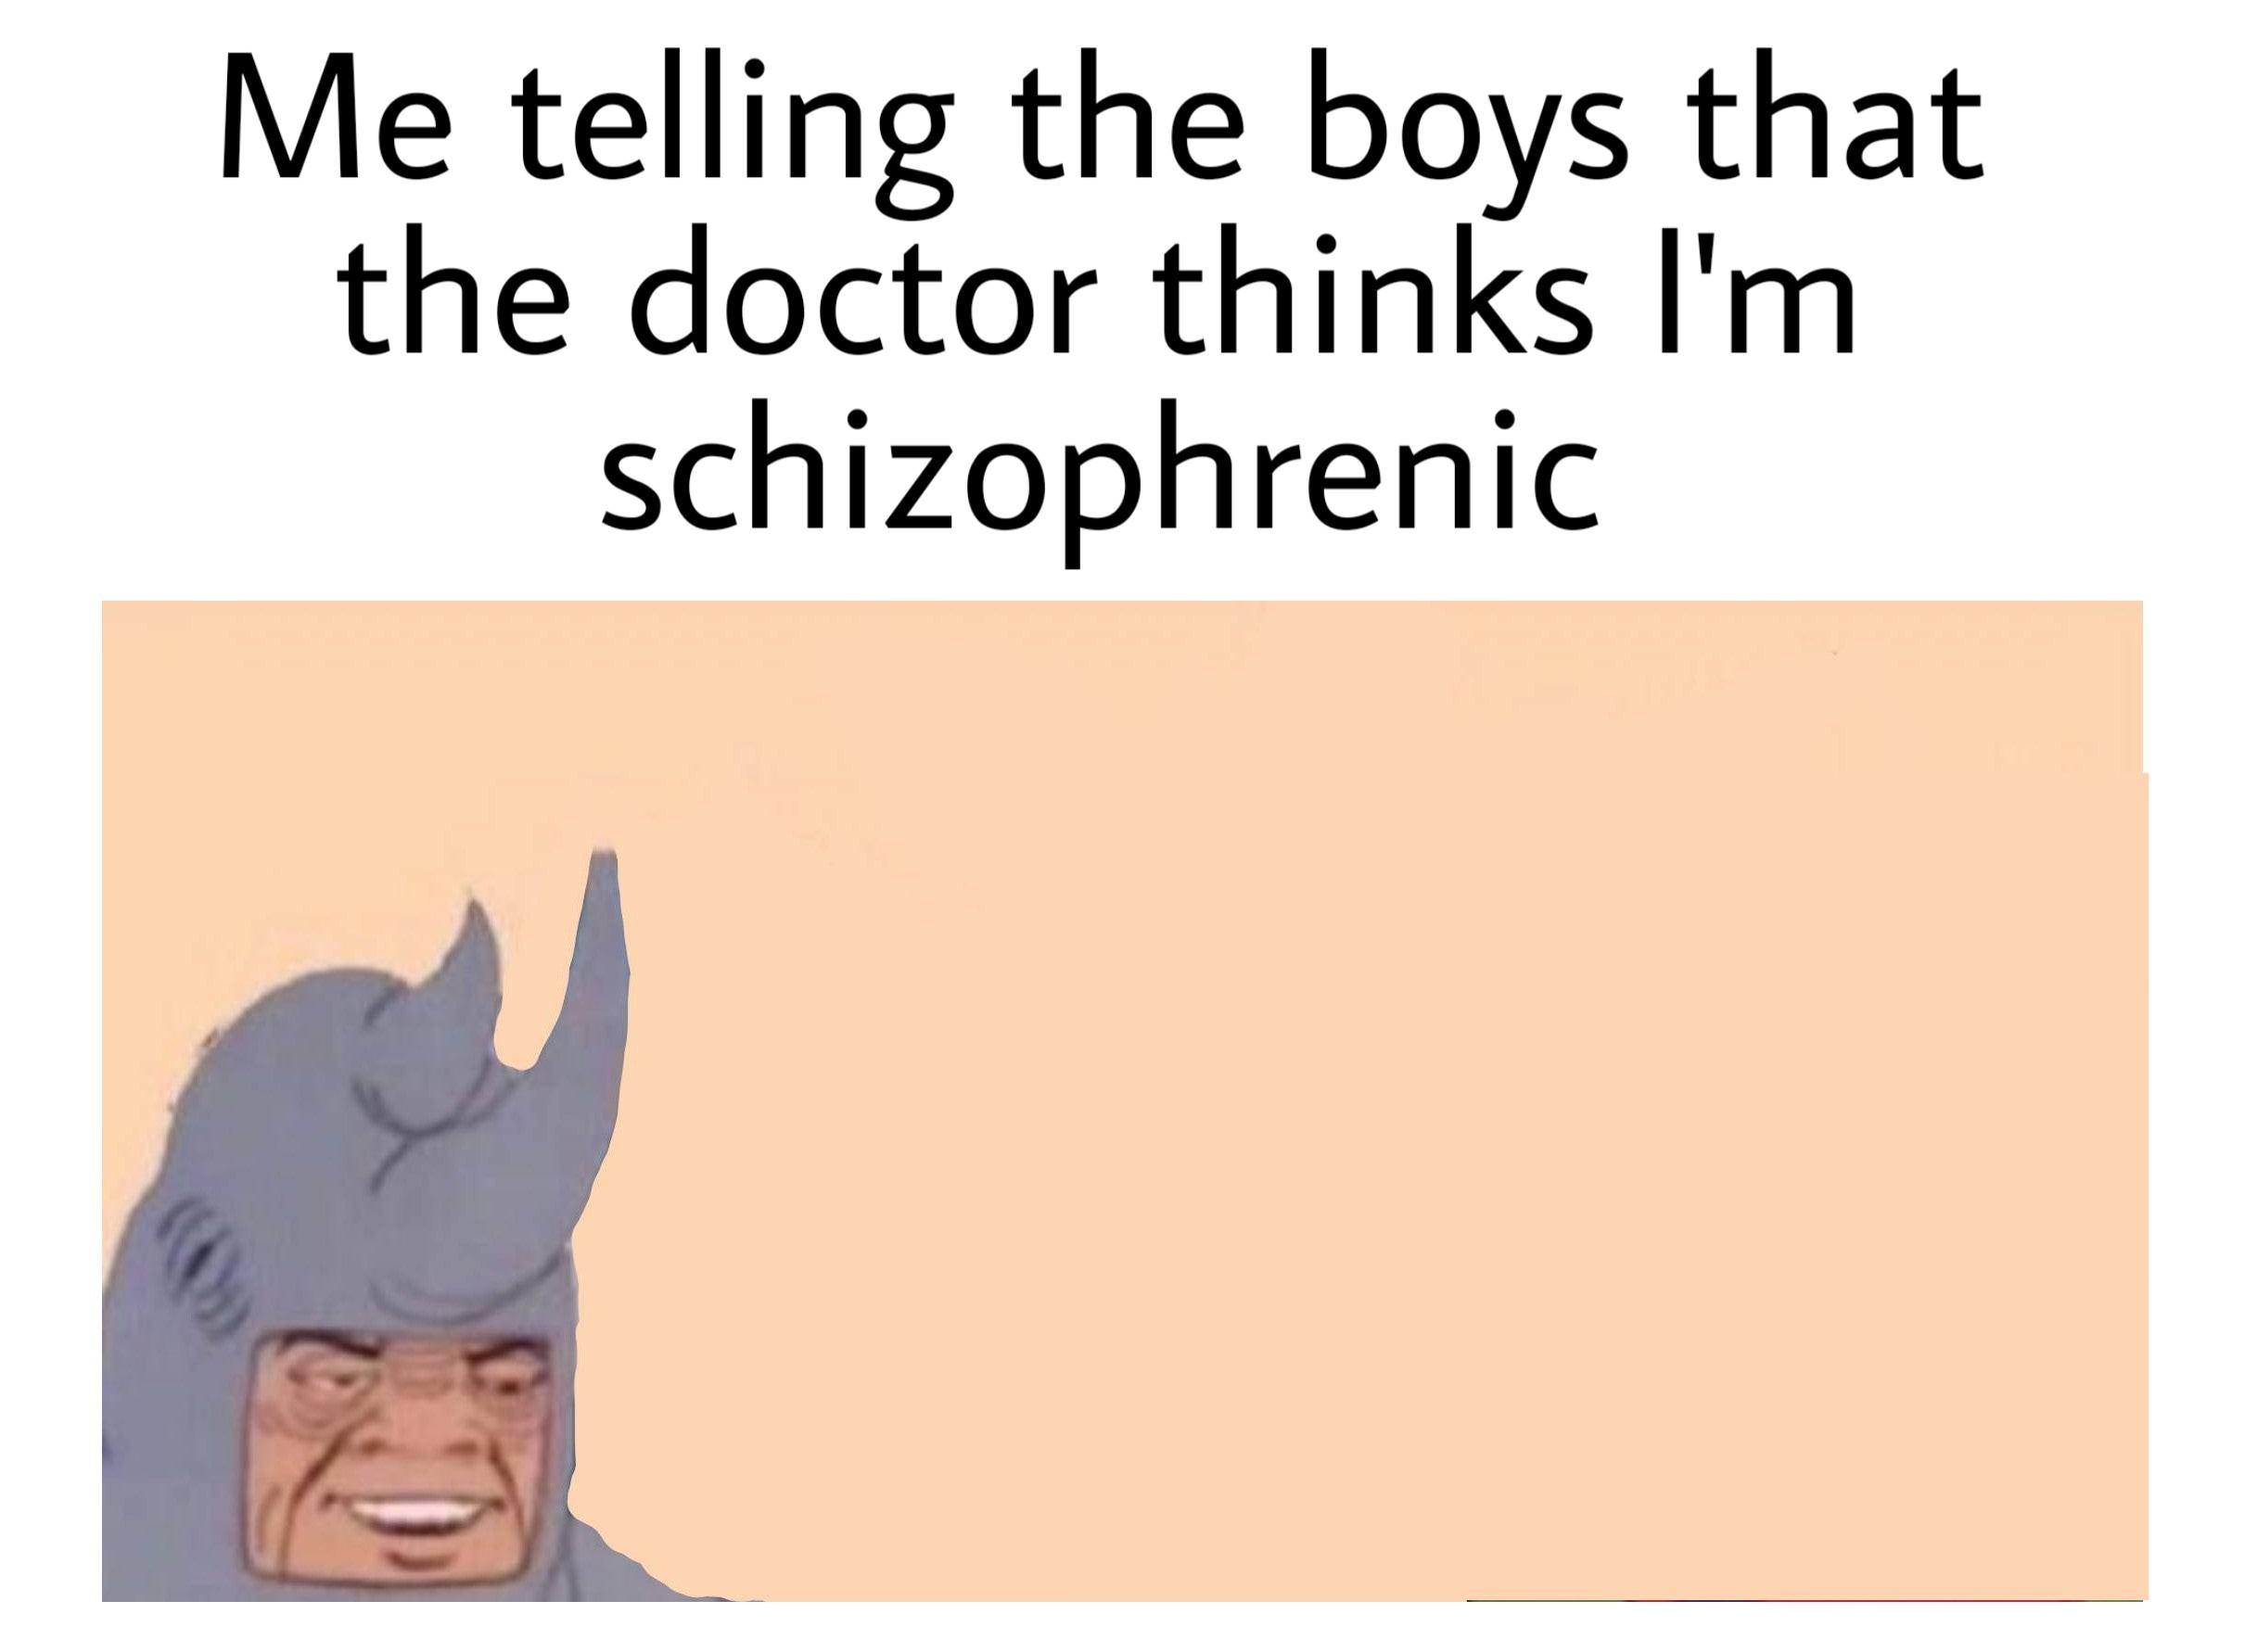 Me and the boys meme -  cartoon - Me telling the boys that the doctor thinks I'm schizophrenic